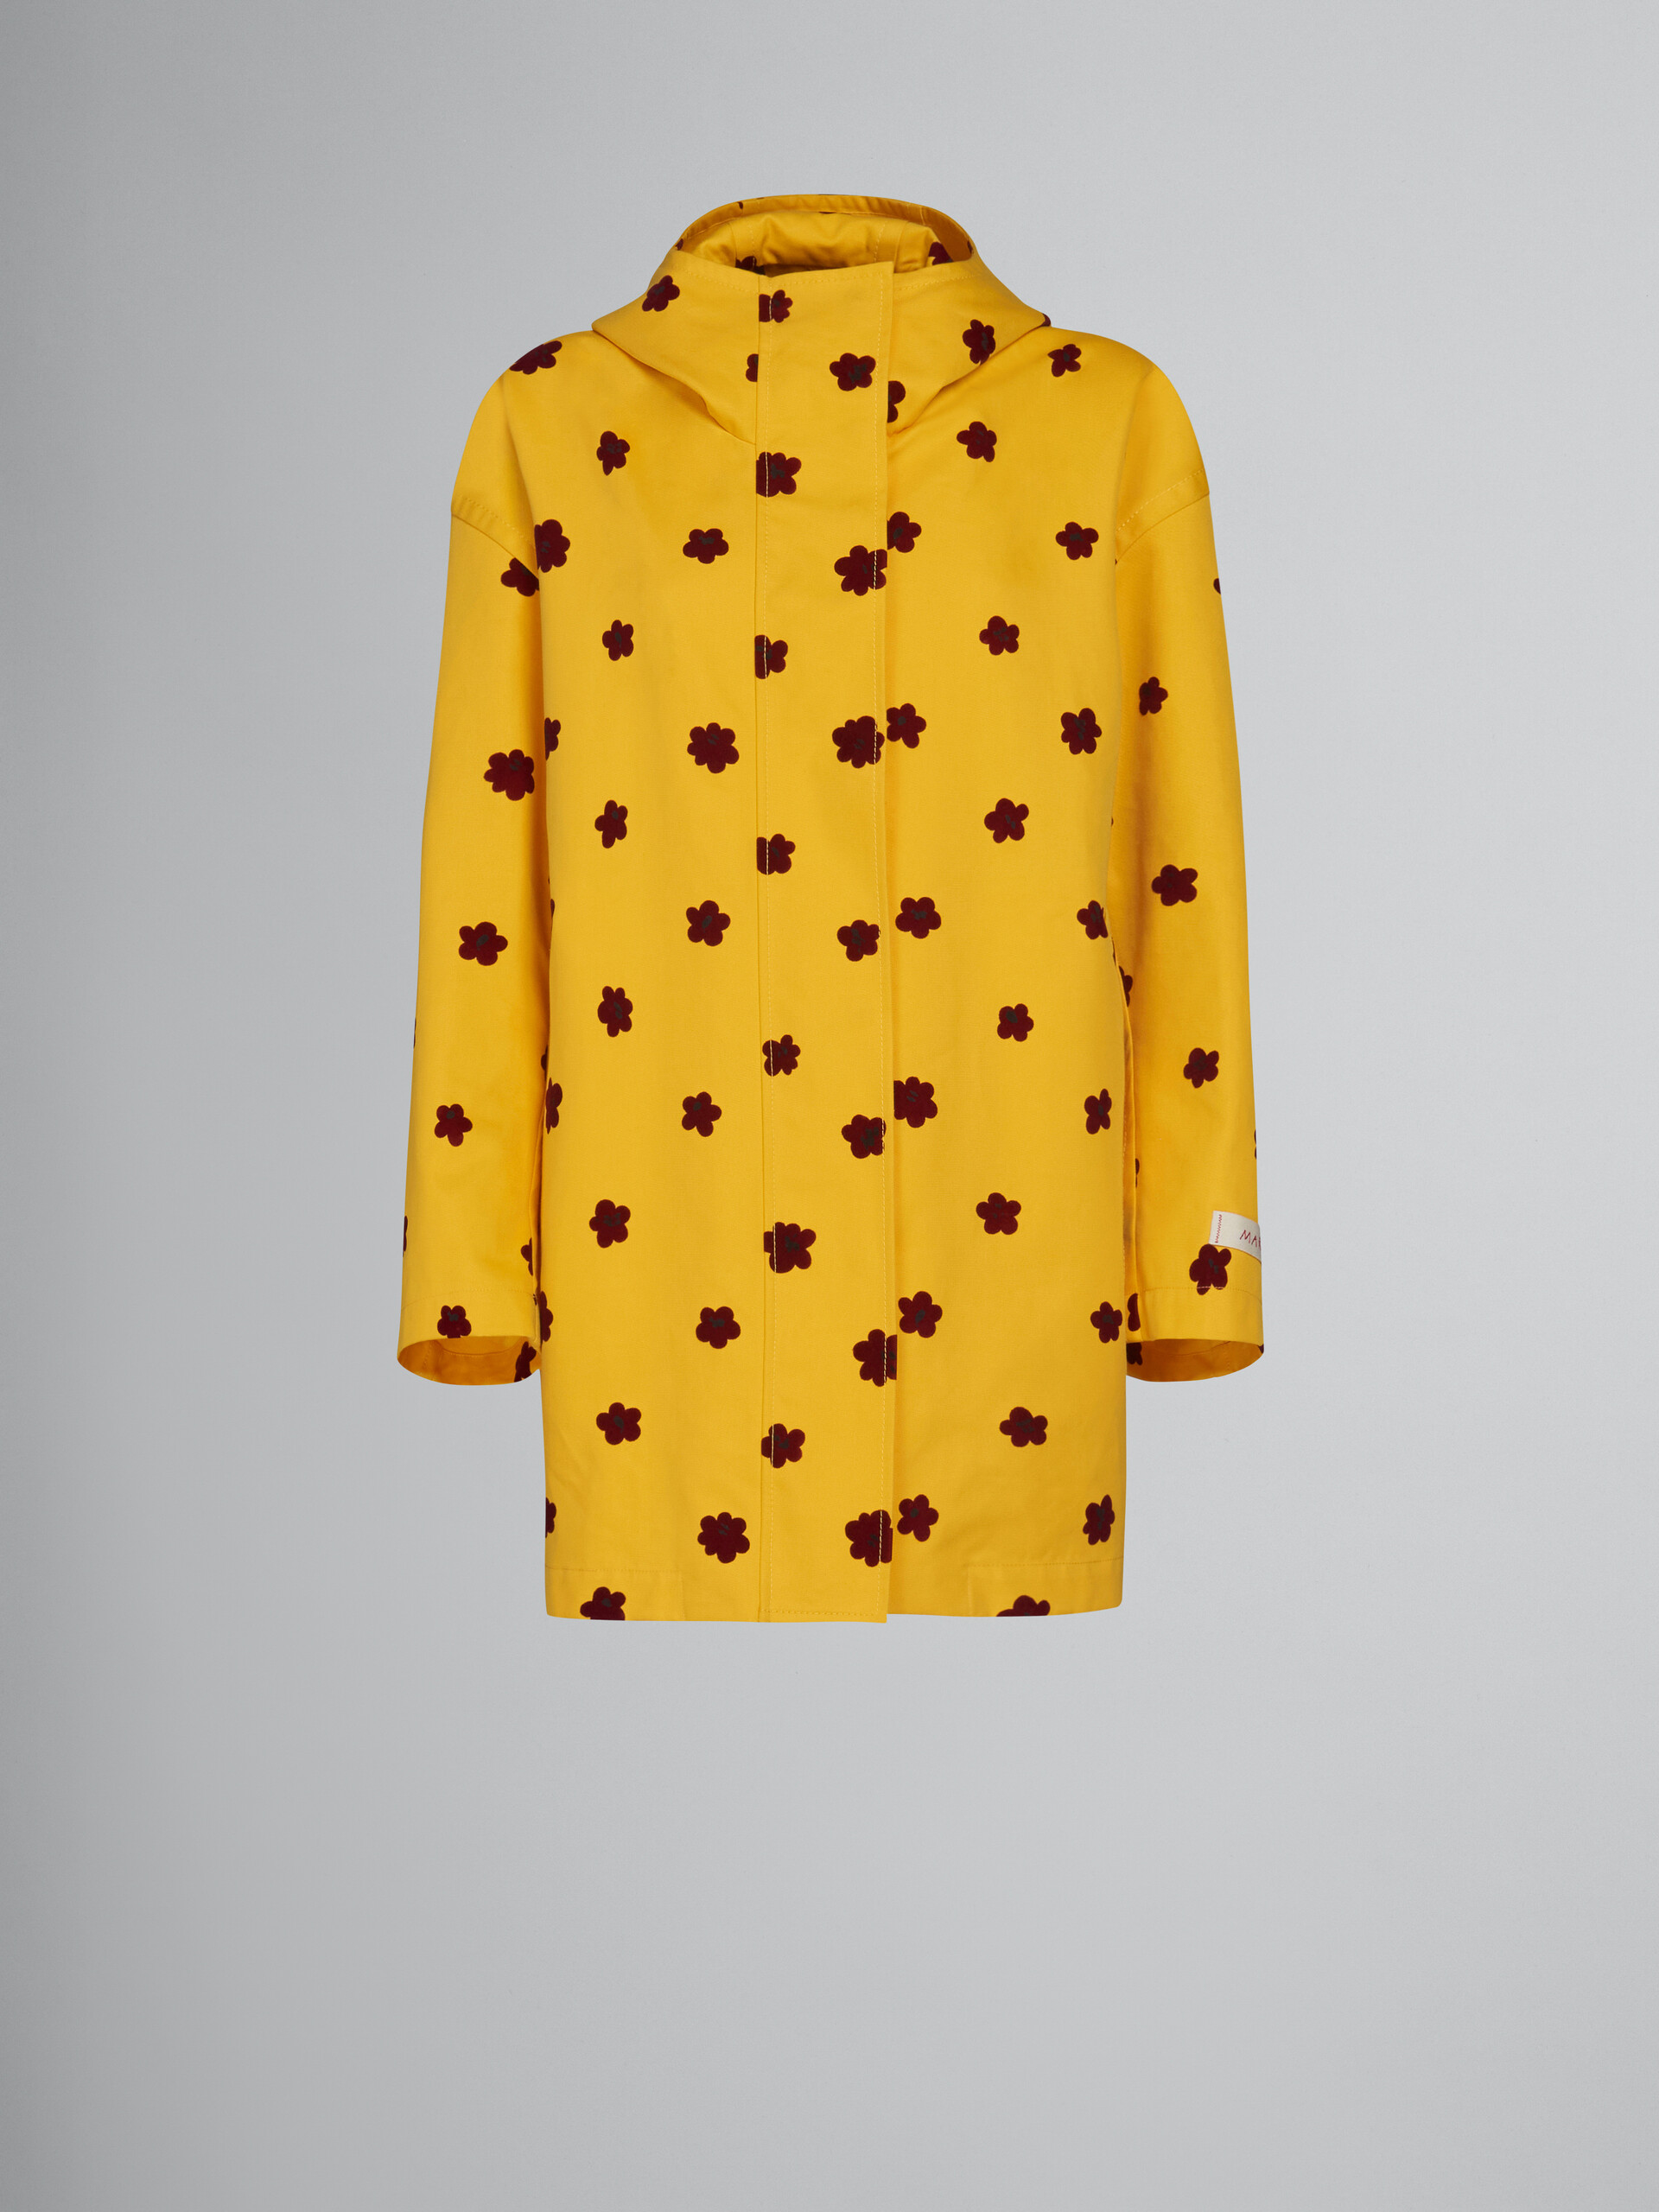 Yellow parka with Draft Flower print - Jackets - Image 1